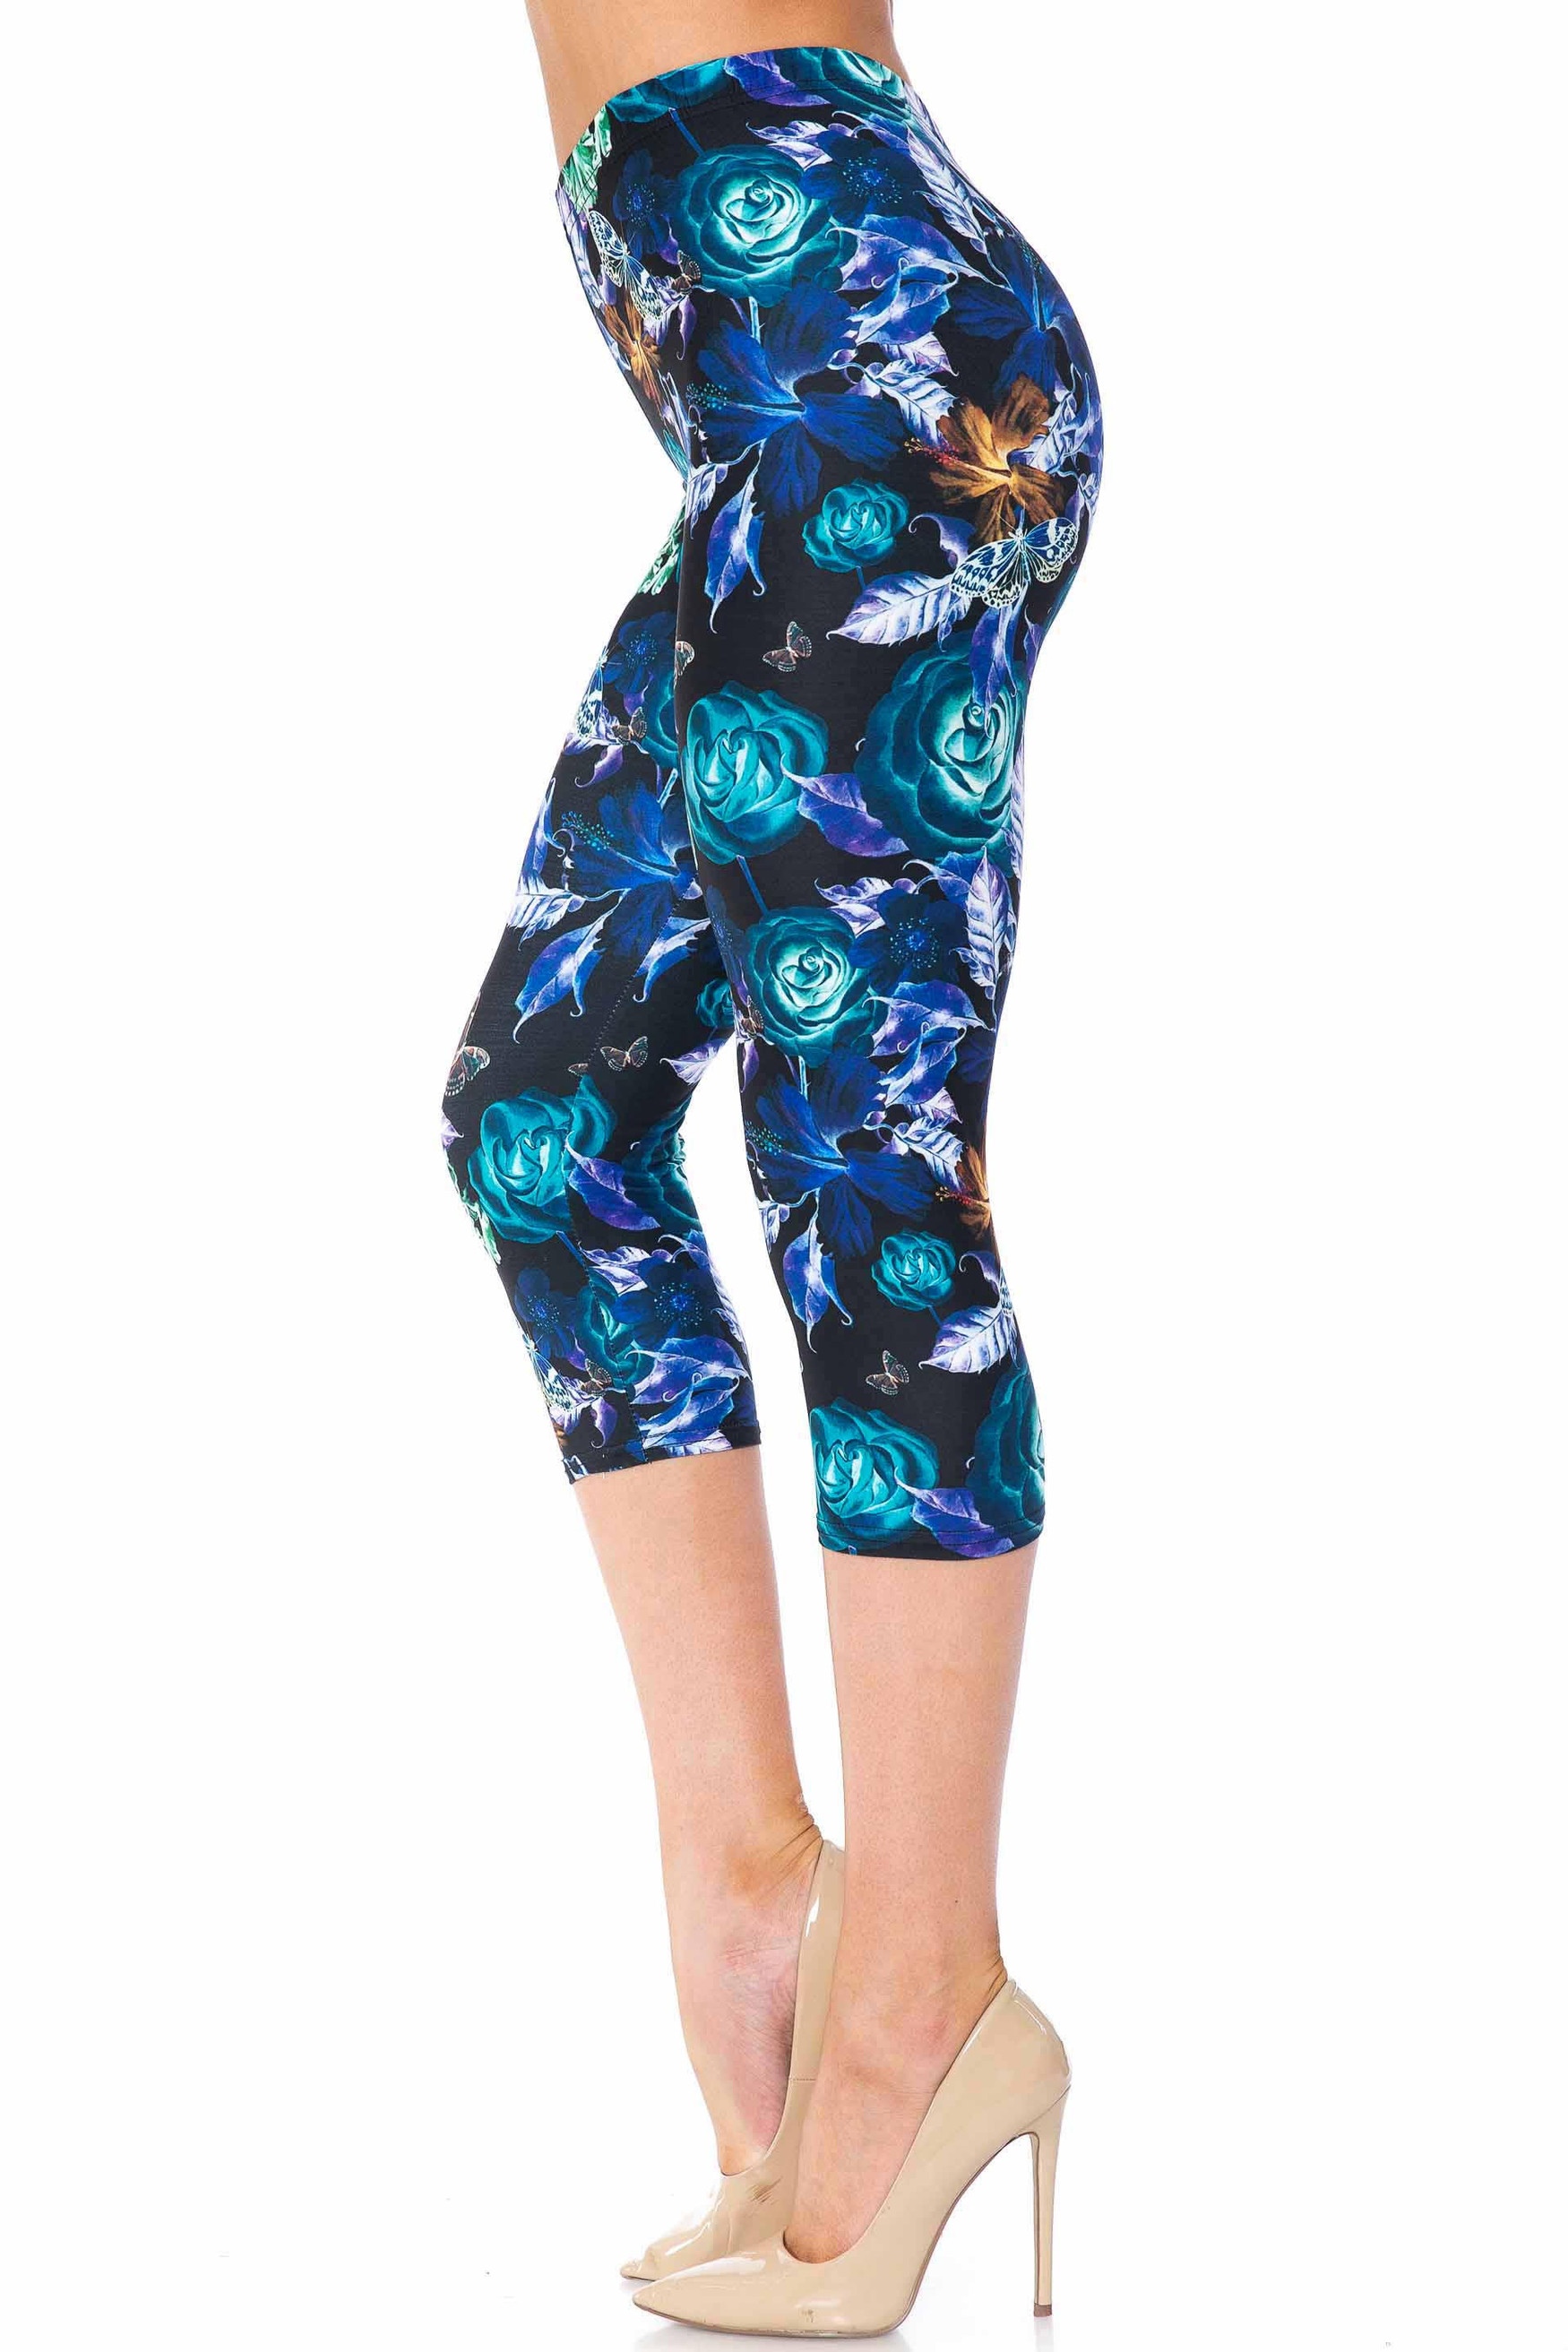 Creamy Soft Electric Blue Floral Butterfly Extra Plus Size Capris - 3X-5X - USA Fashion™